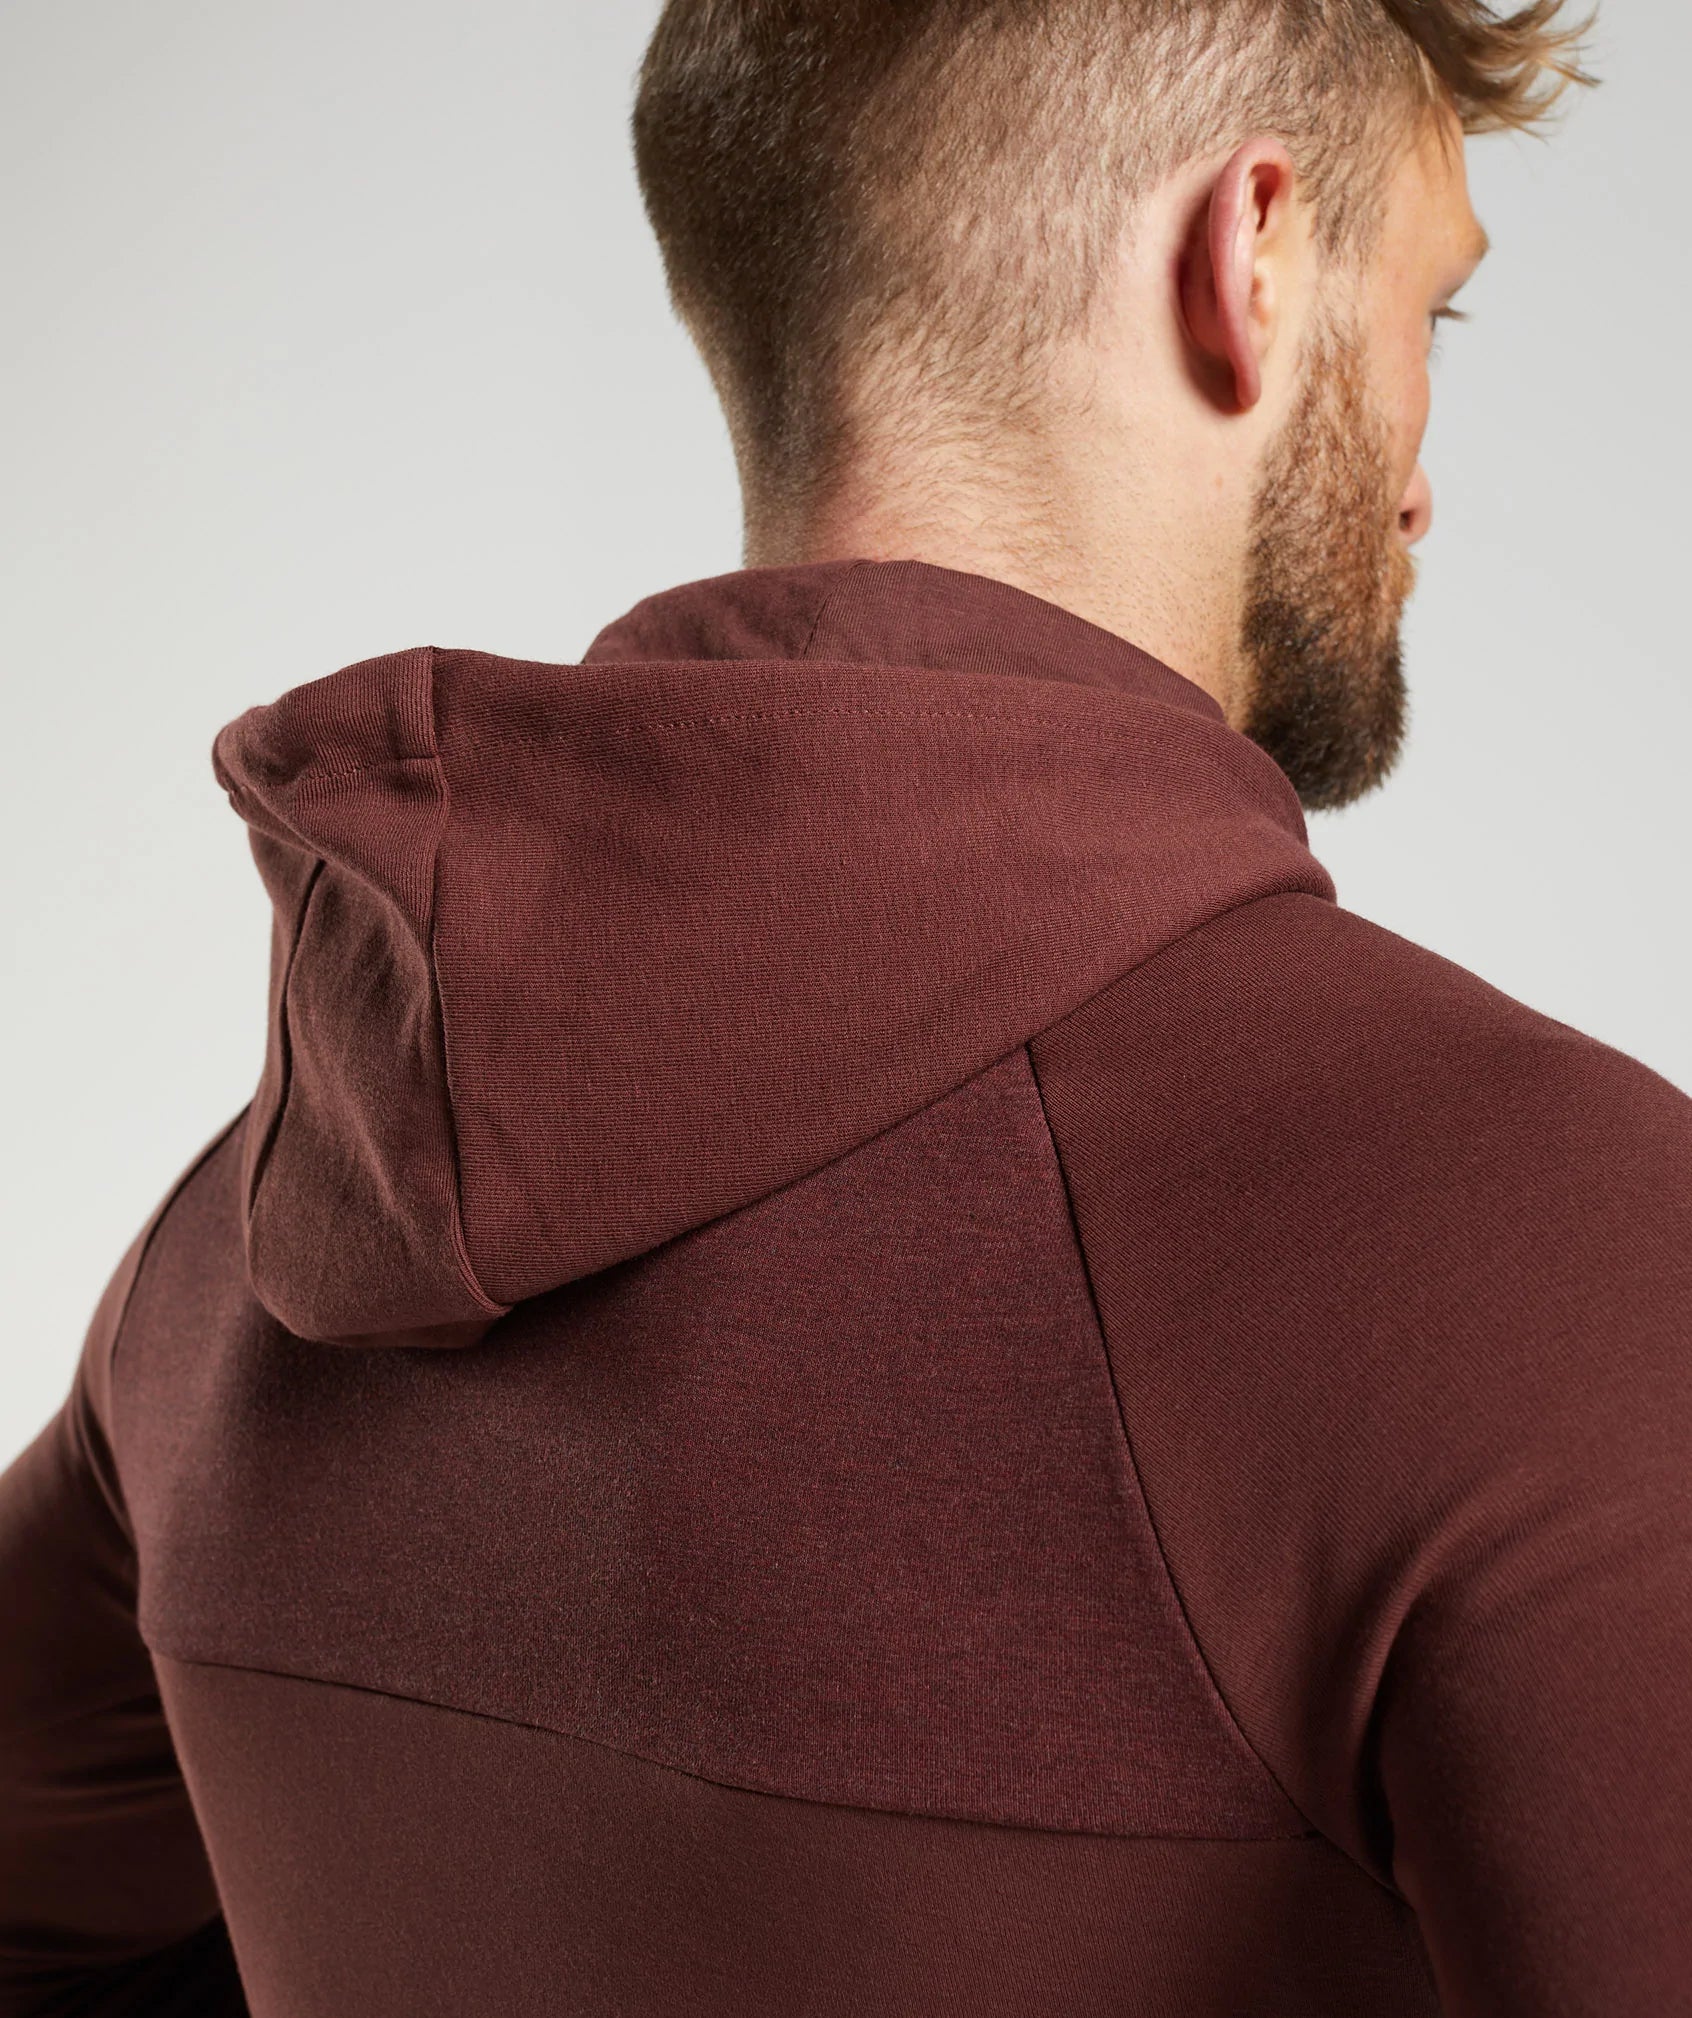 Bold React Hoodie in Cherry Brown